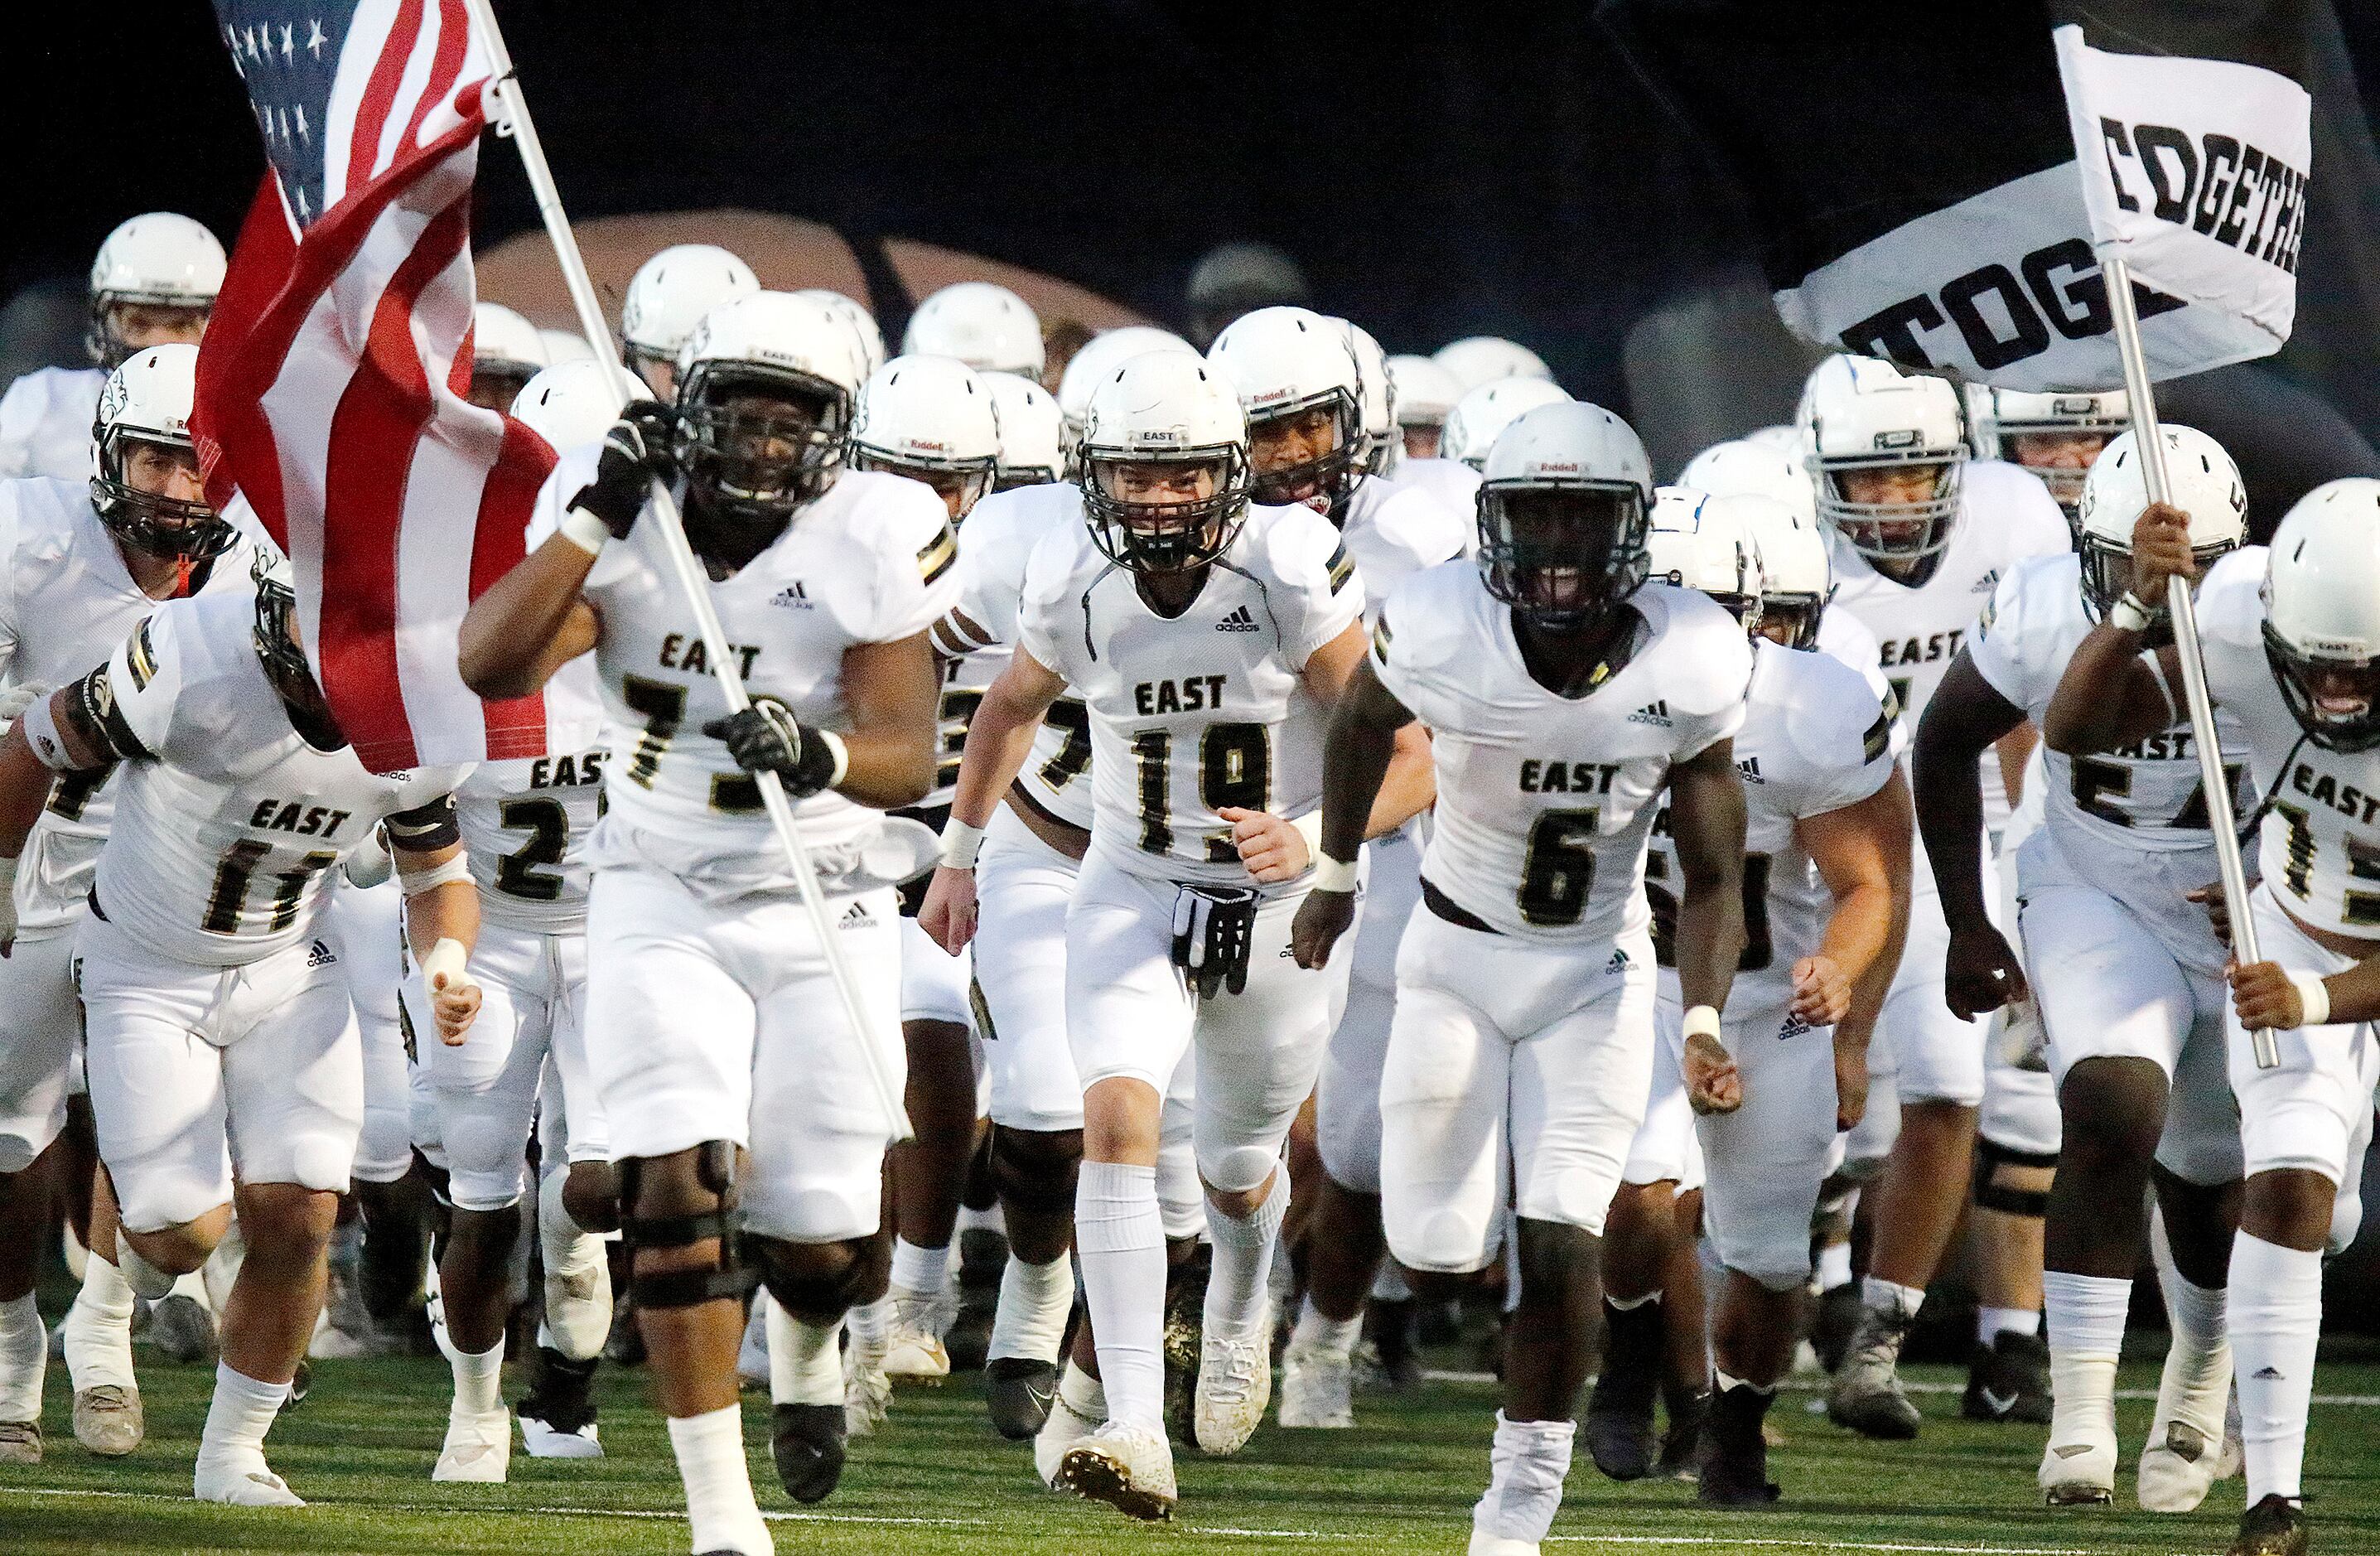 Plano East High School runs onto the field before kickoff as Flower Mound High School hosted...